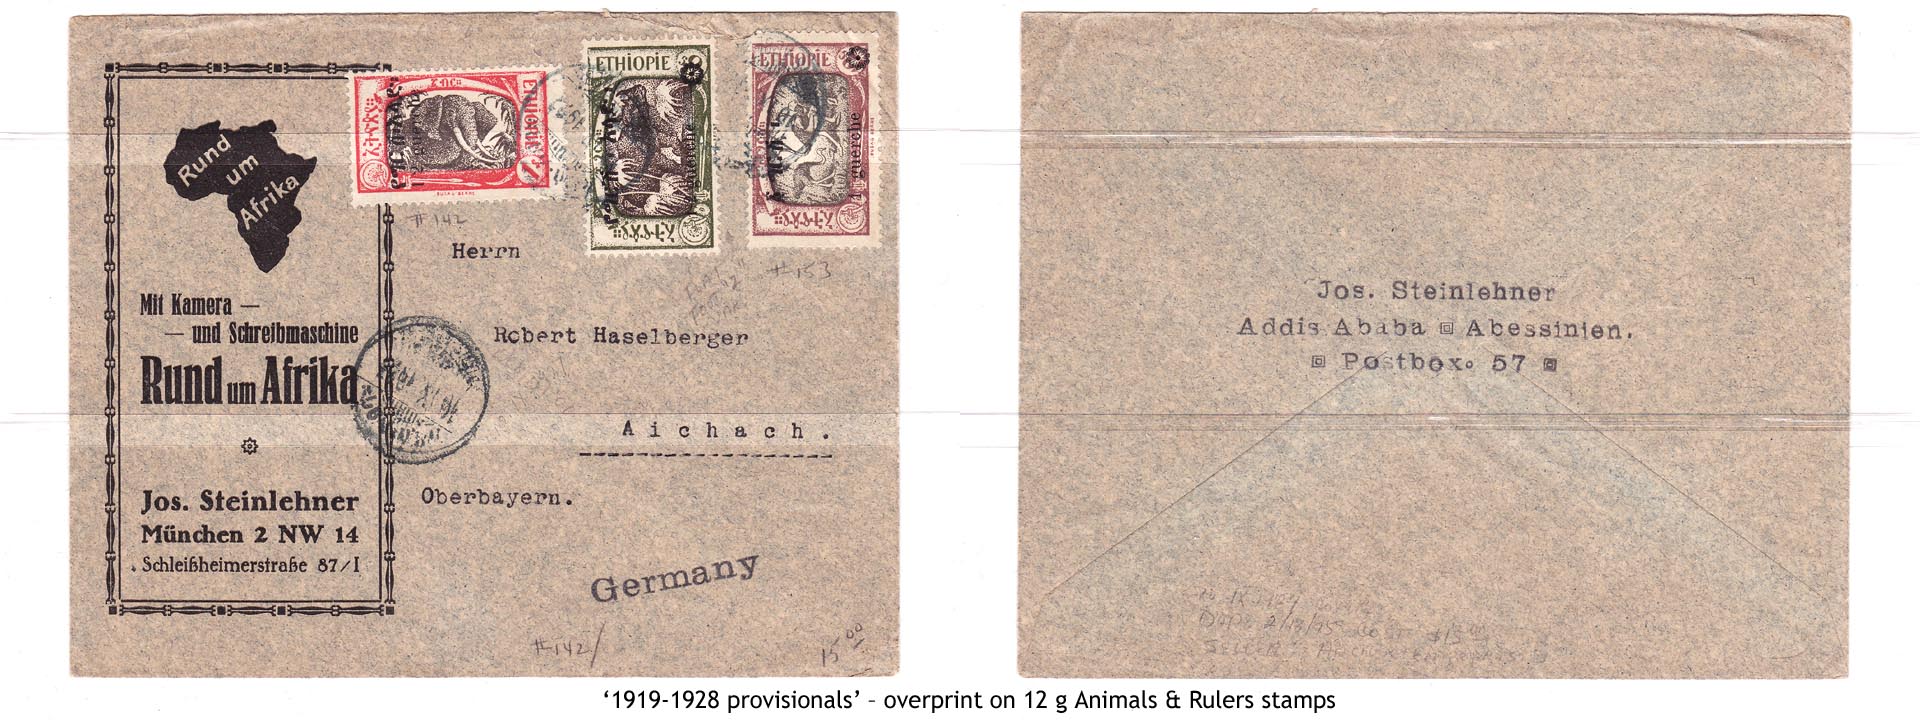 1919-1928 provisionals’ – overprint on 12 g Animals & Rulers stamps